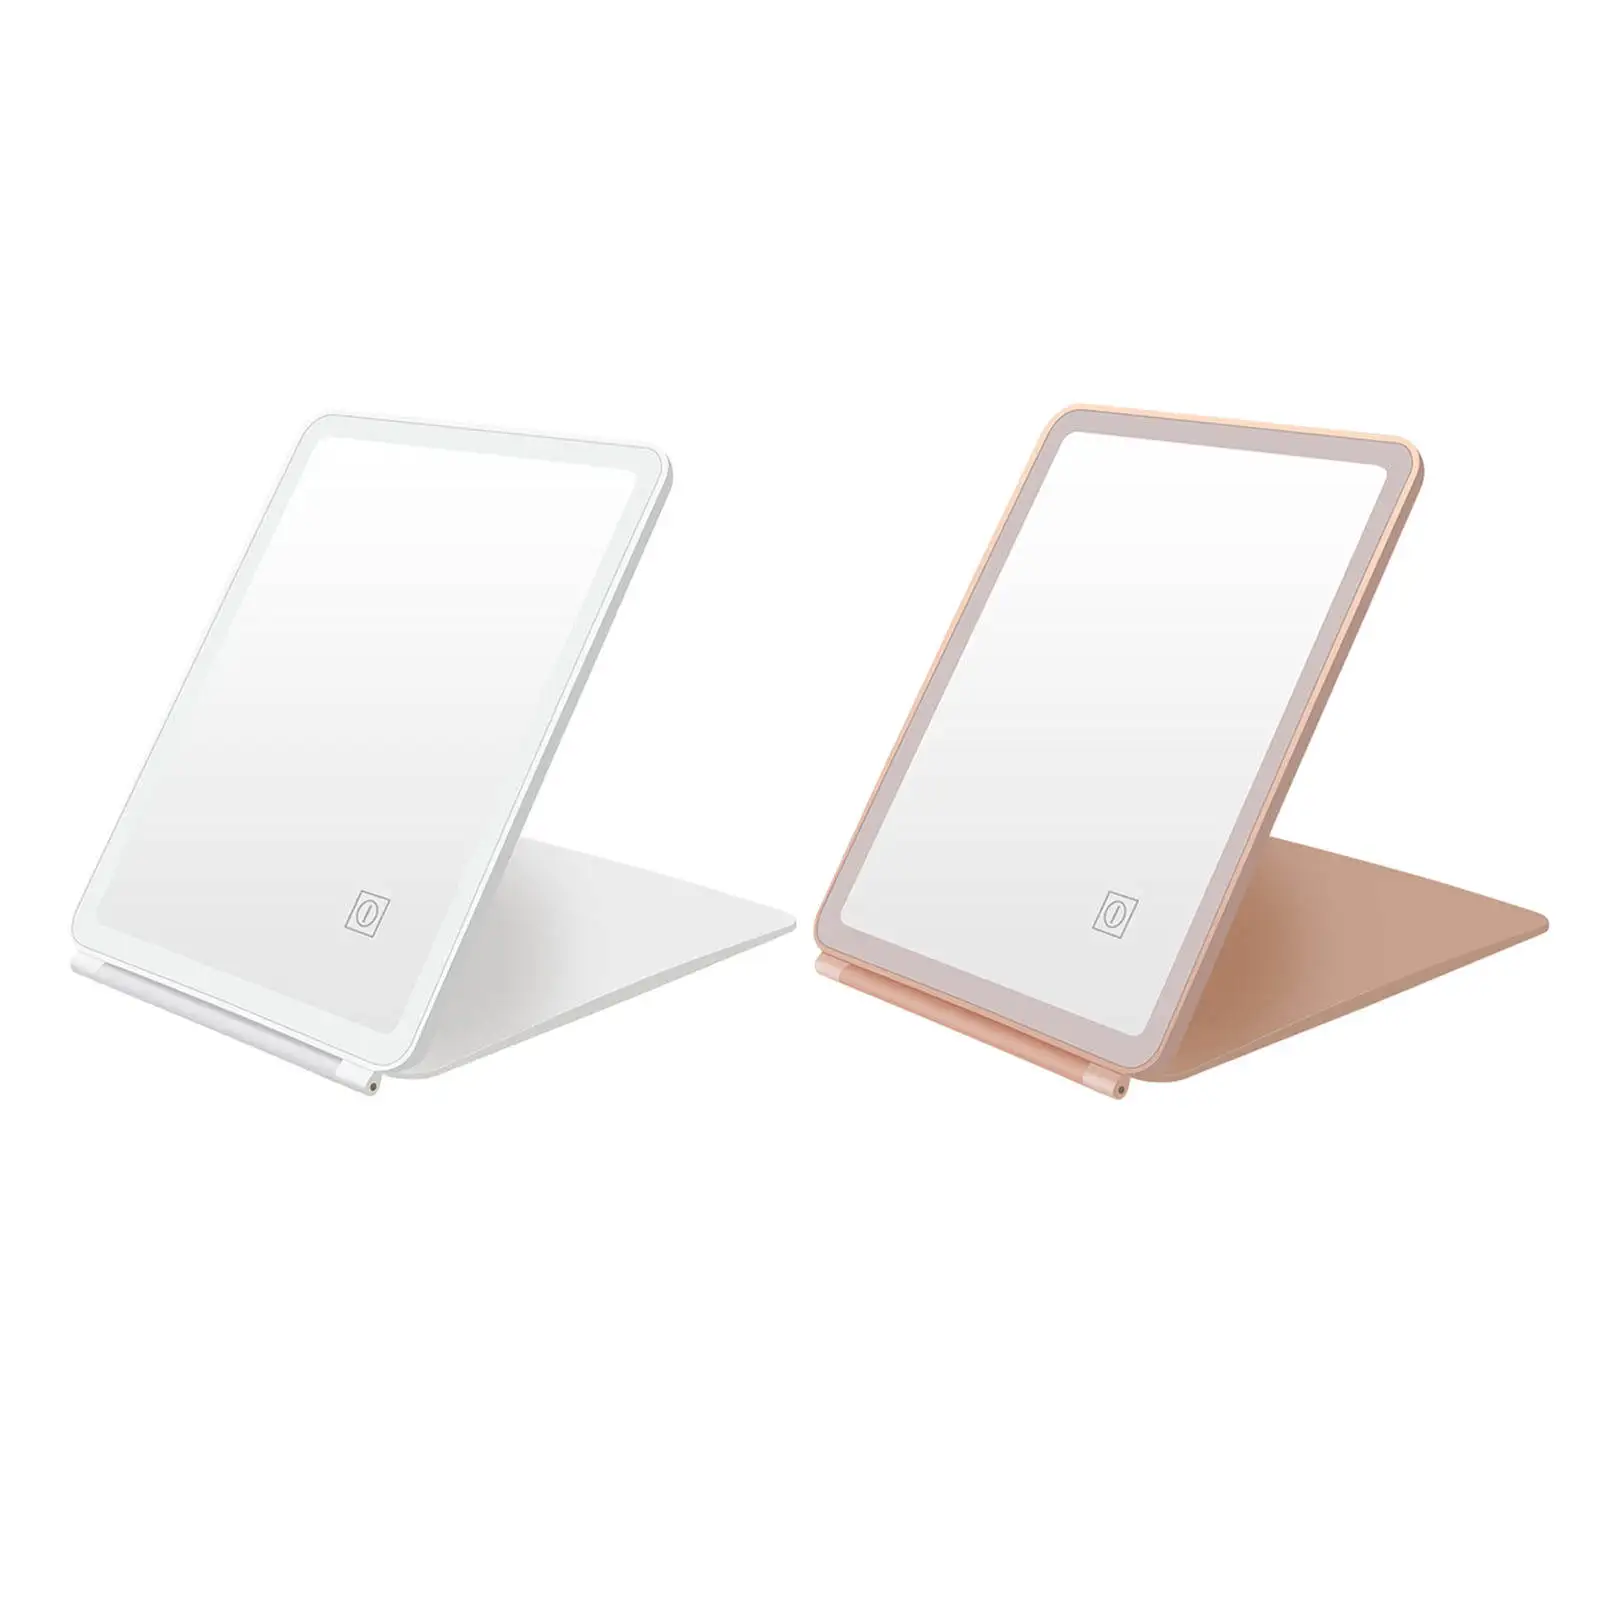 Flip LED Makeup Mirror Touch Screen Dimming 120 Adjustable USB Rechargeable Dimmable Cosmetic Lighted up Mirror for Home Beauty